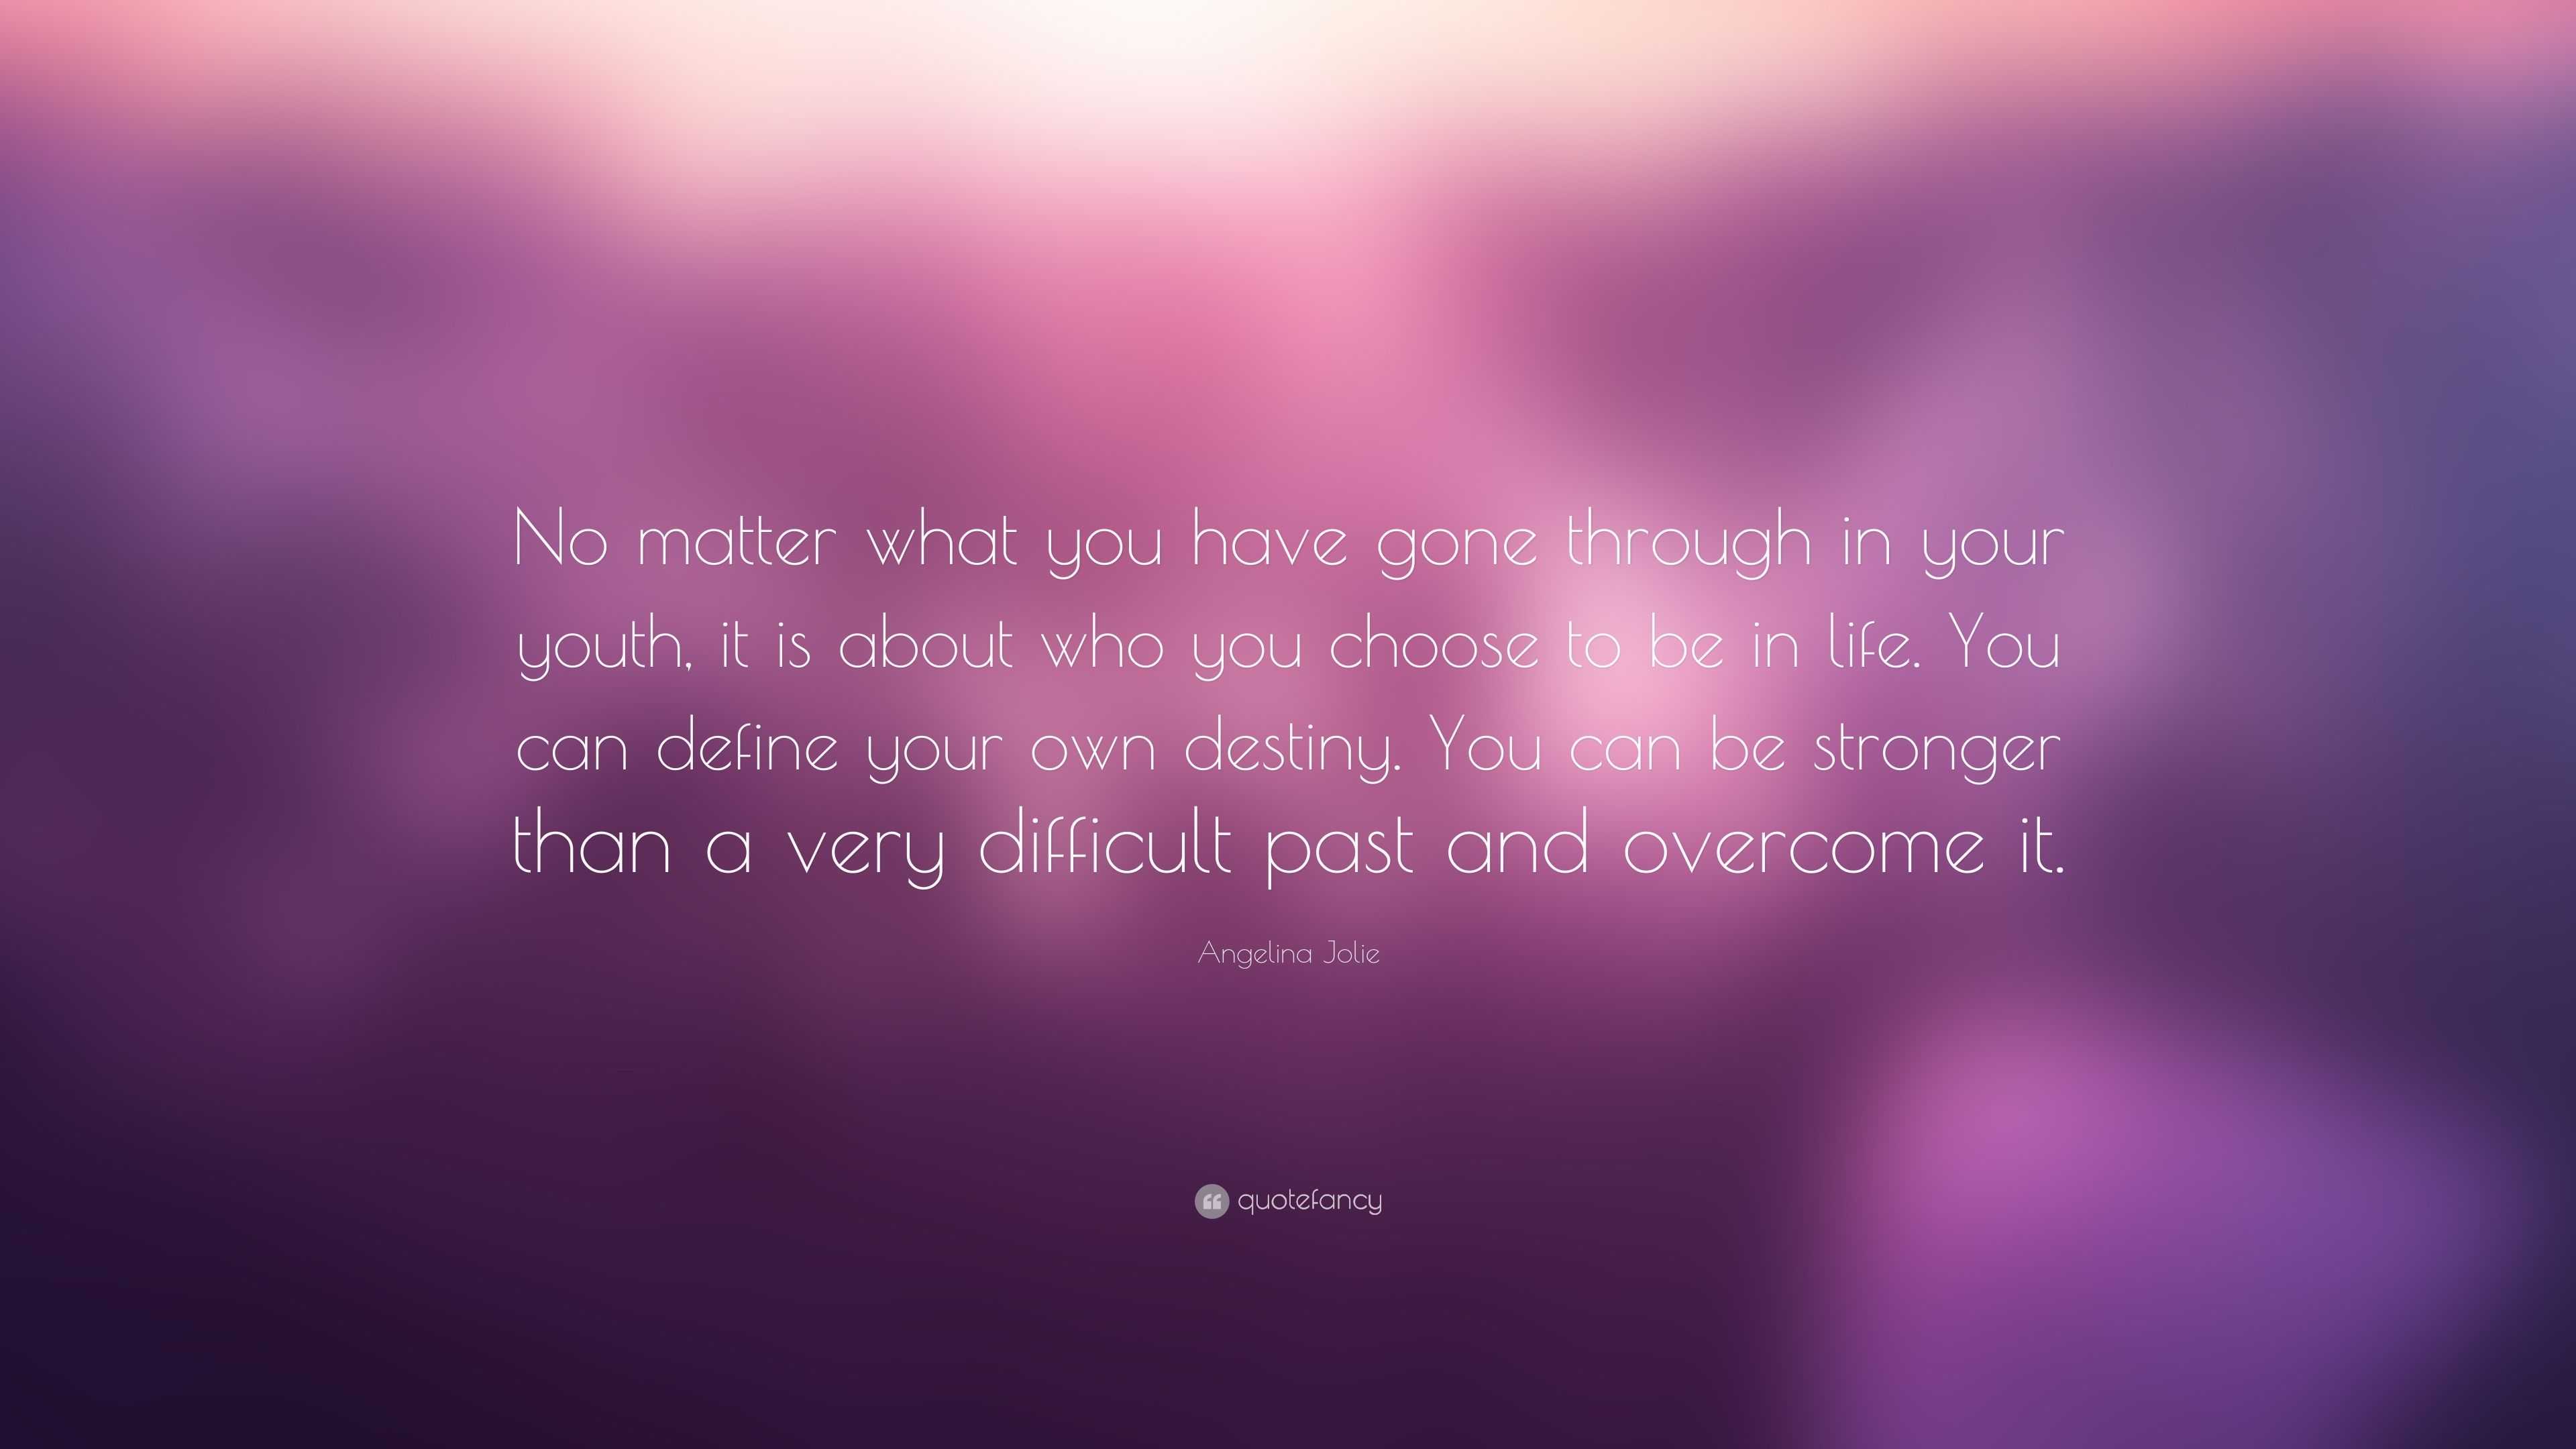 Angelina Jolie Quote: “No matter what you have gone through in your ...